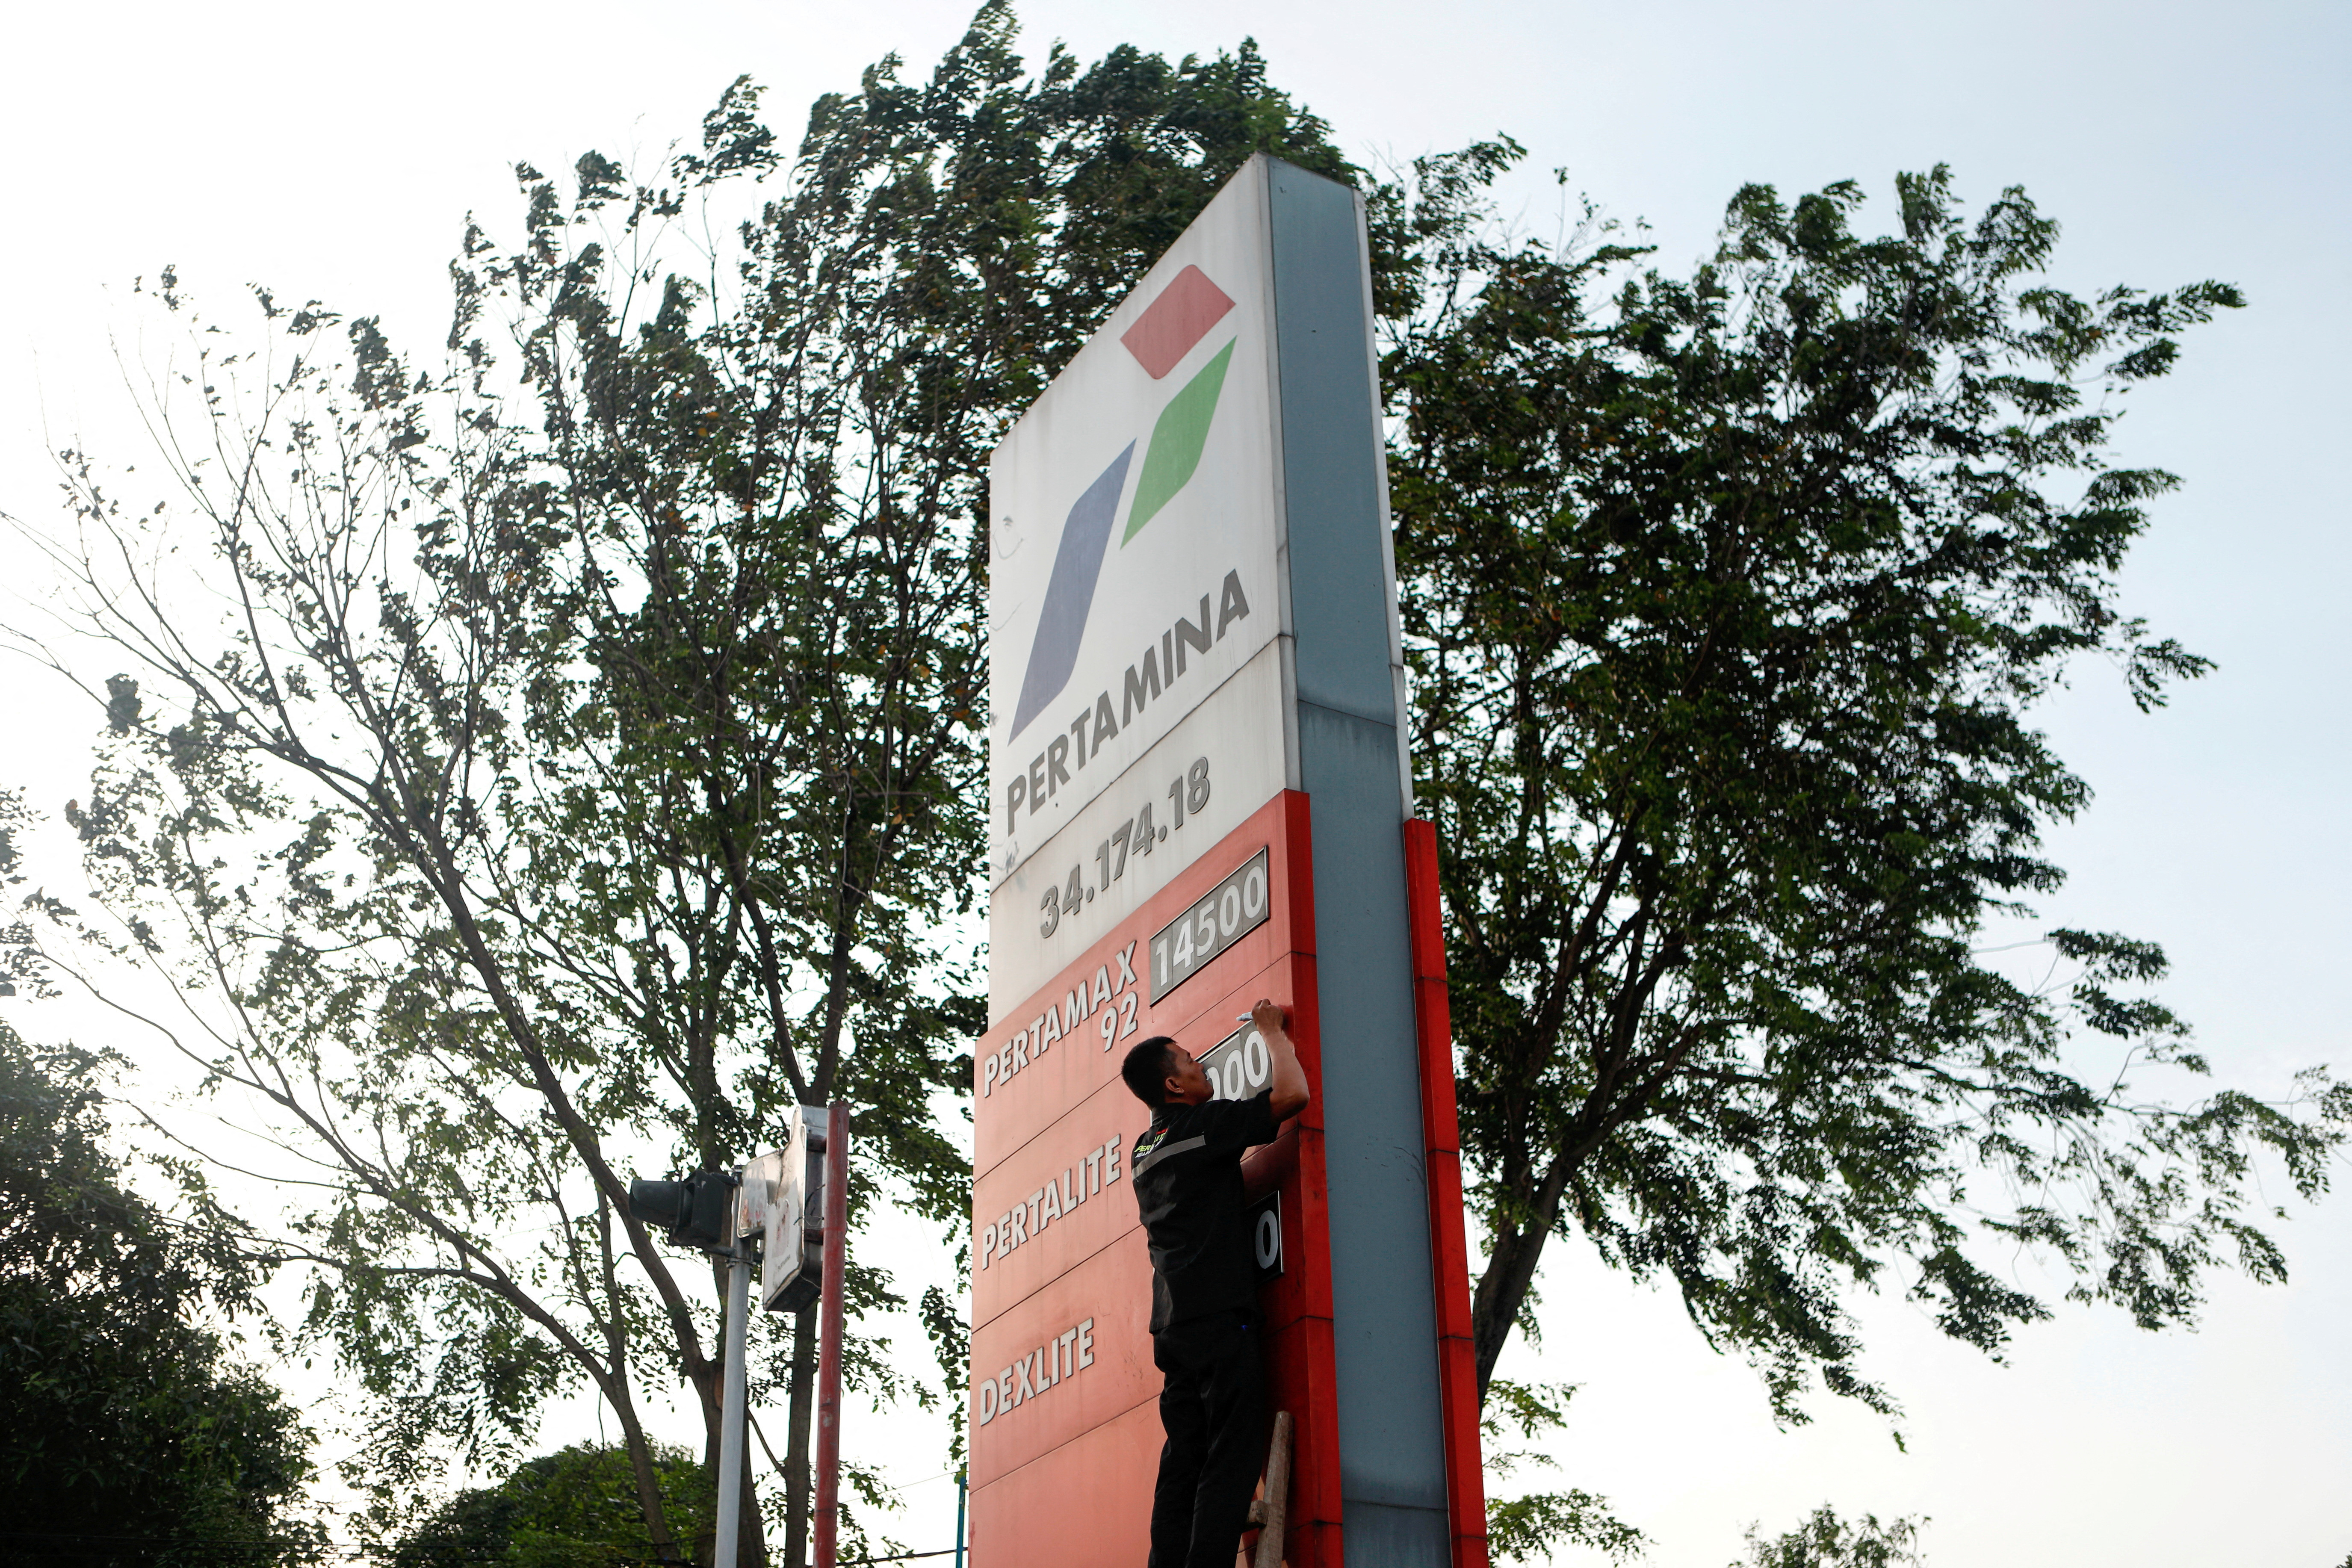 A worker of a petrol station of the state-owned company Pertamina changes the fuel prices displayed after the announcement of a fuel price hike, in Bekasi